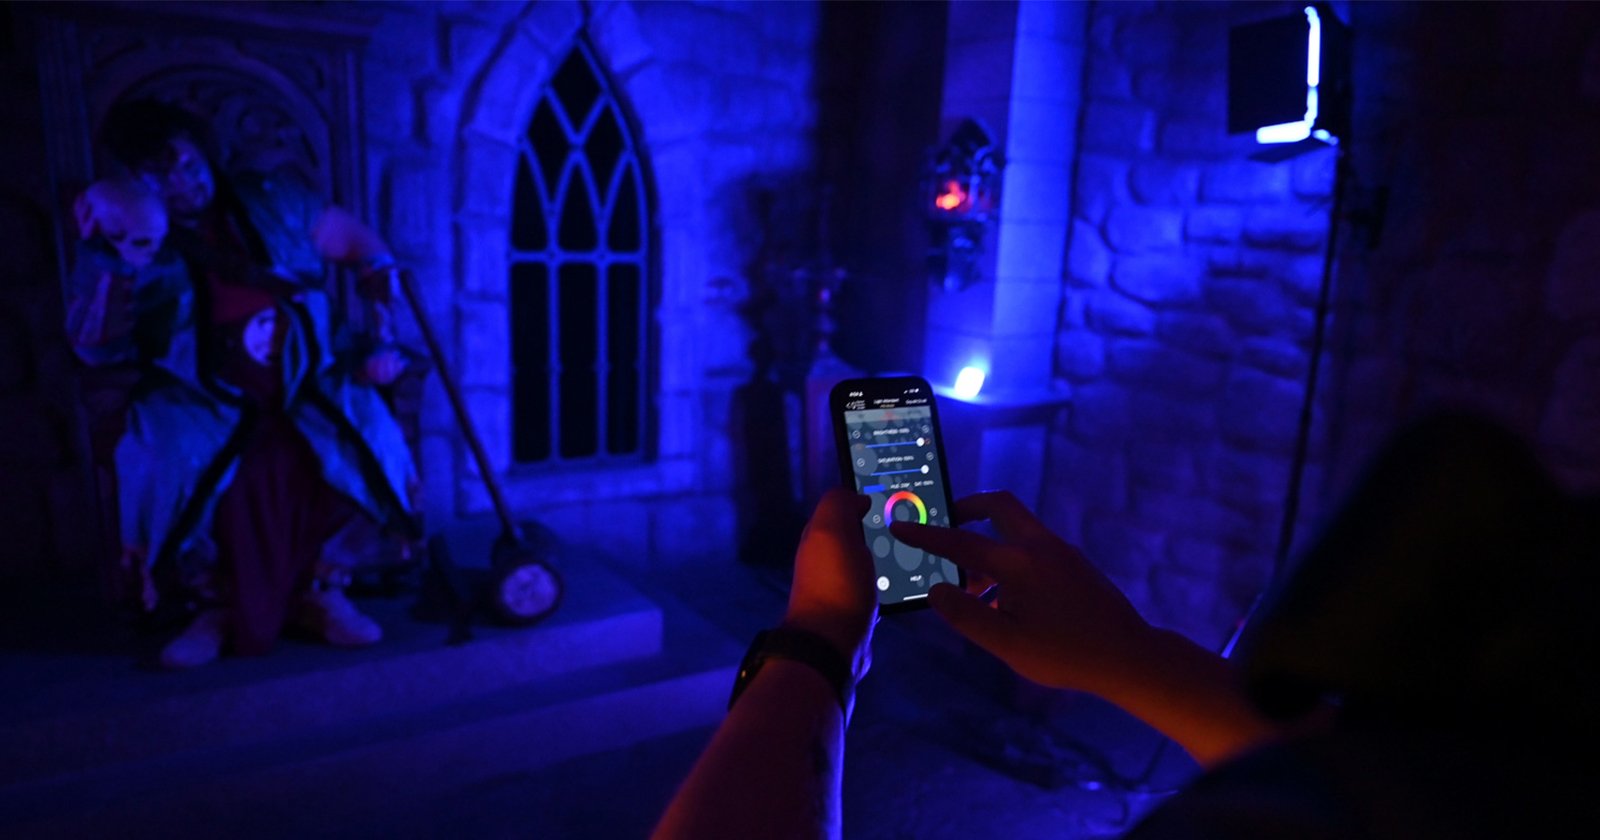 Promaster Light Attendant App Takes The Guess Work Out of Lighting On Set